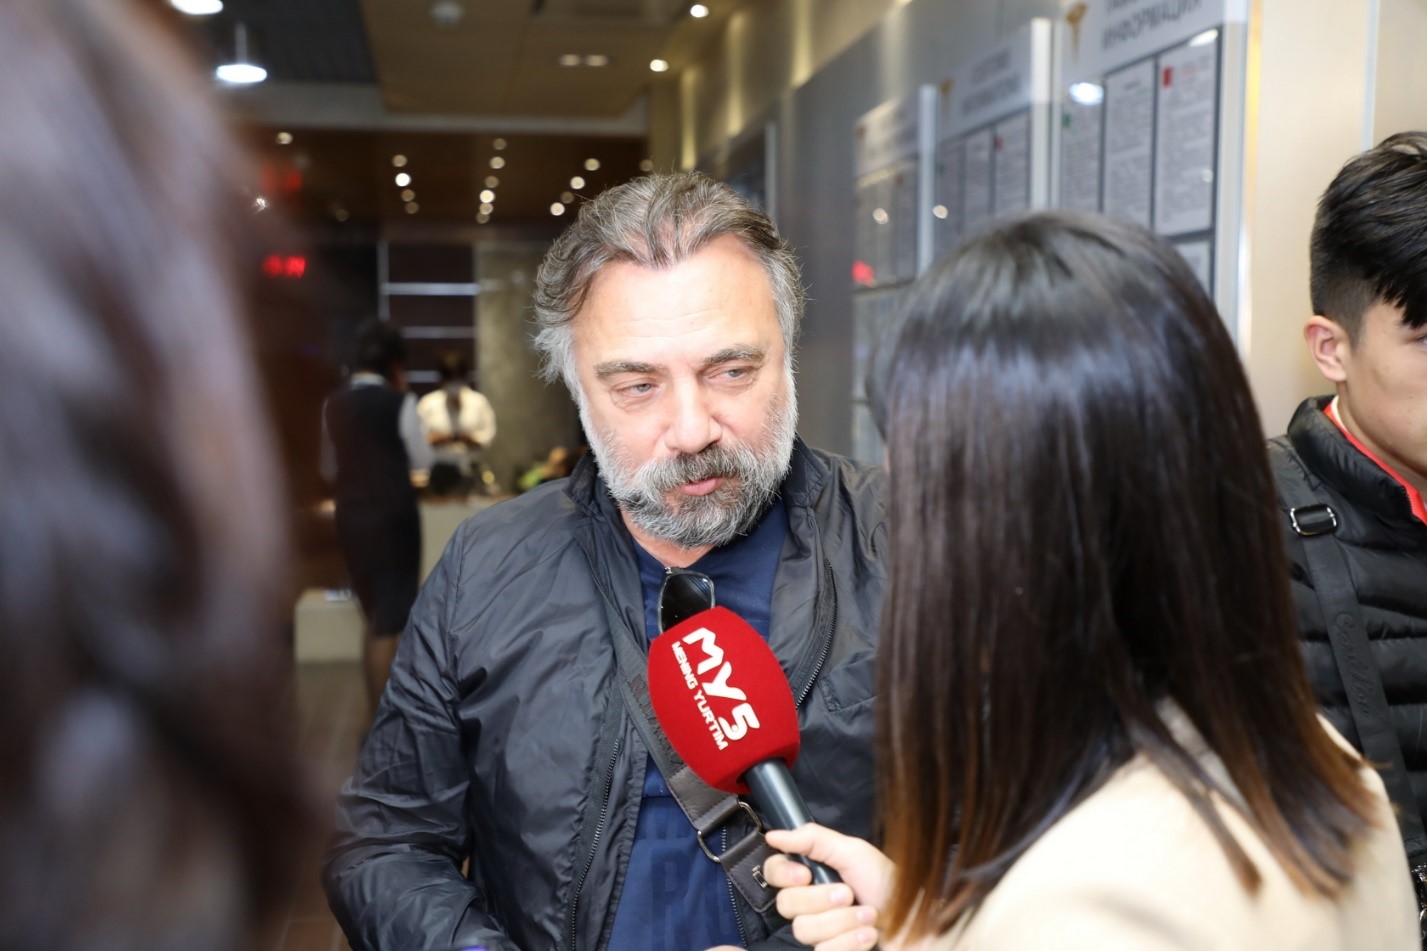 Turkish actor Oktay Kaynarca expressed a desire to participate in new projects.